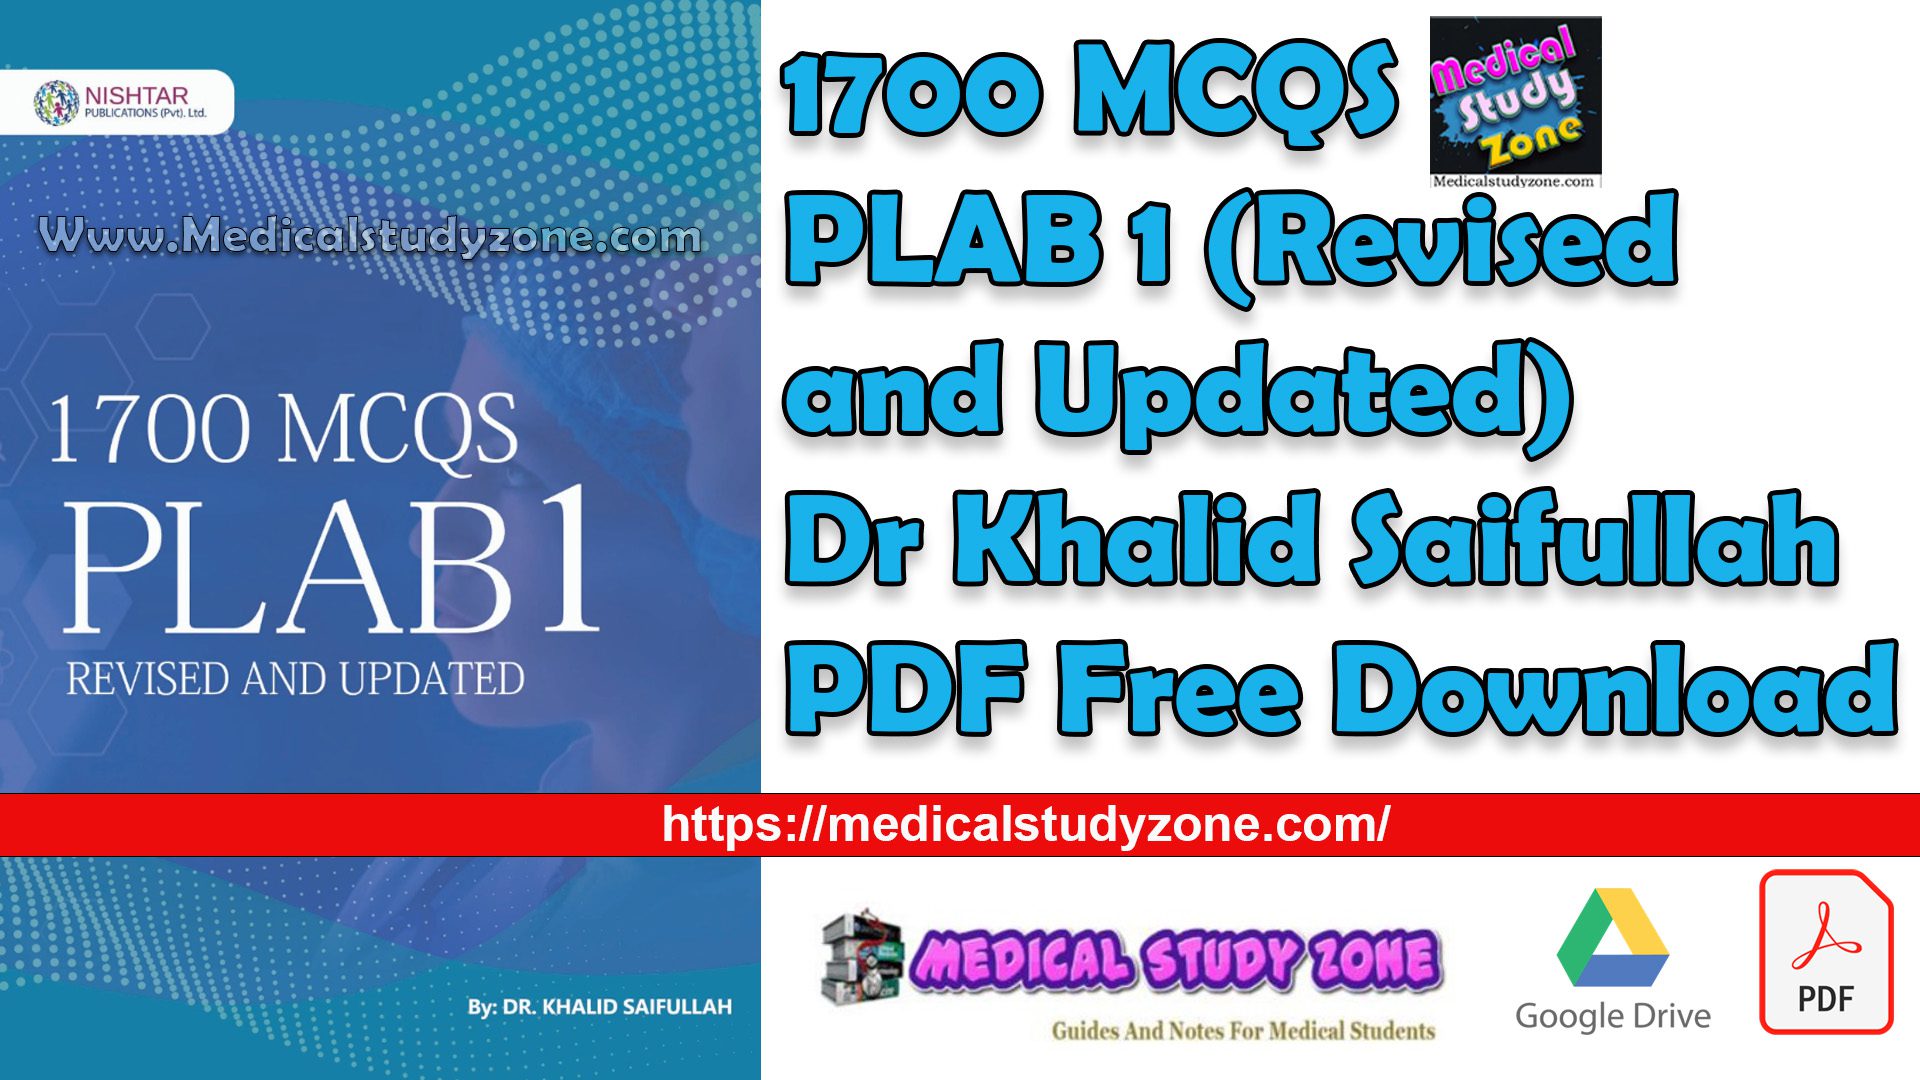 1700 MCQS PLAB 1 (Revised and Updated) Dr Khalid Saifullah PDF Free Download